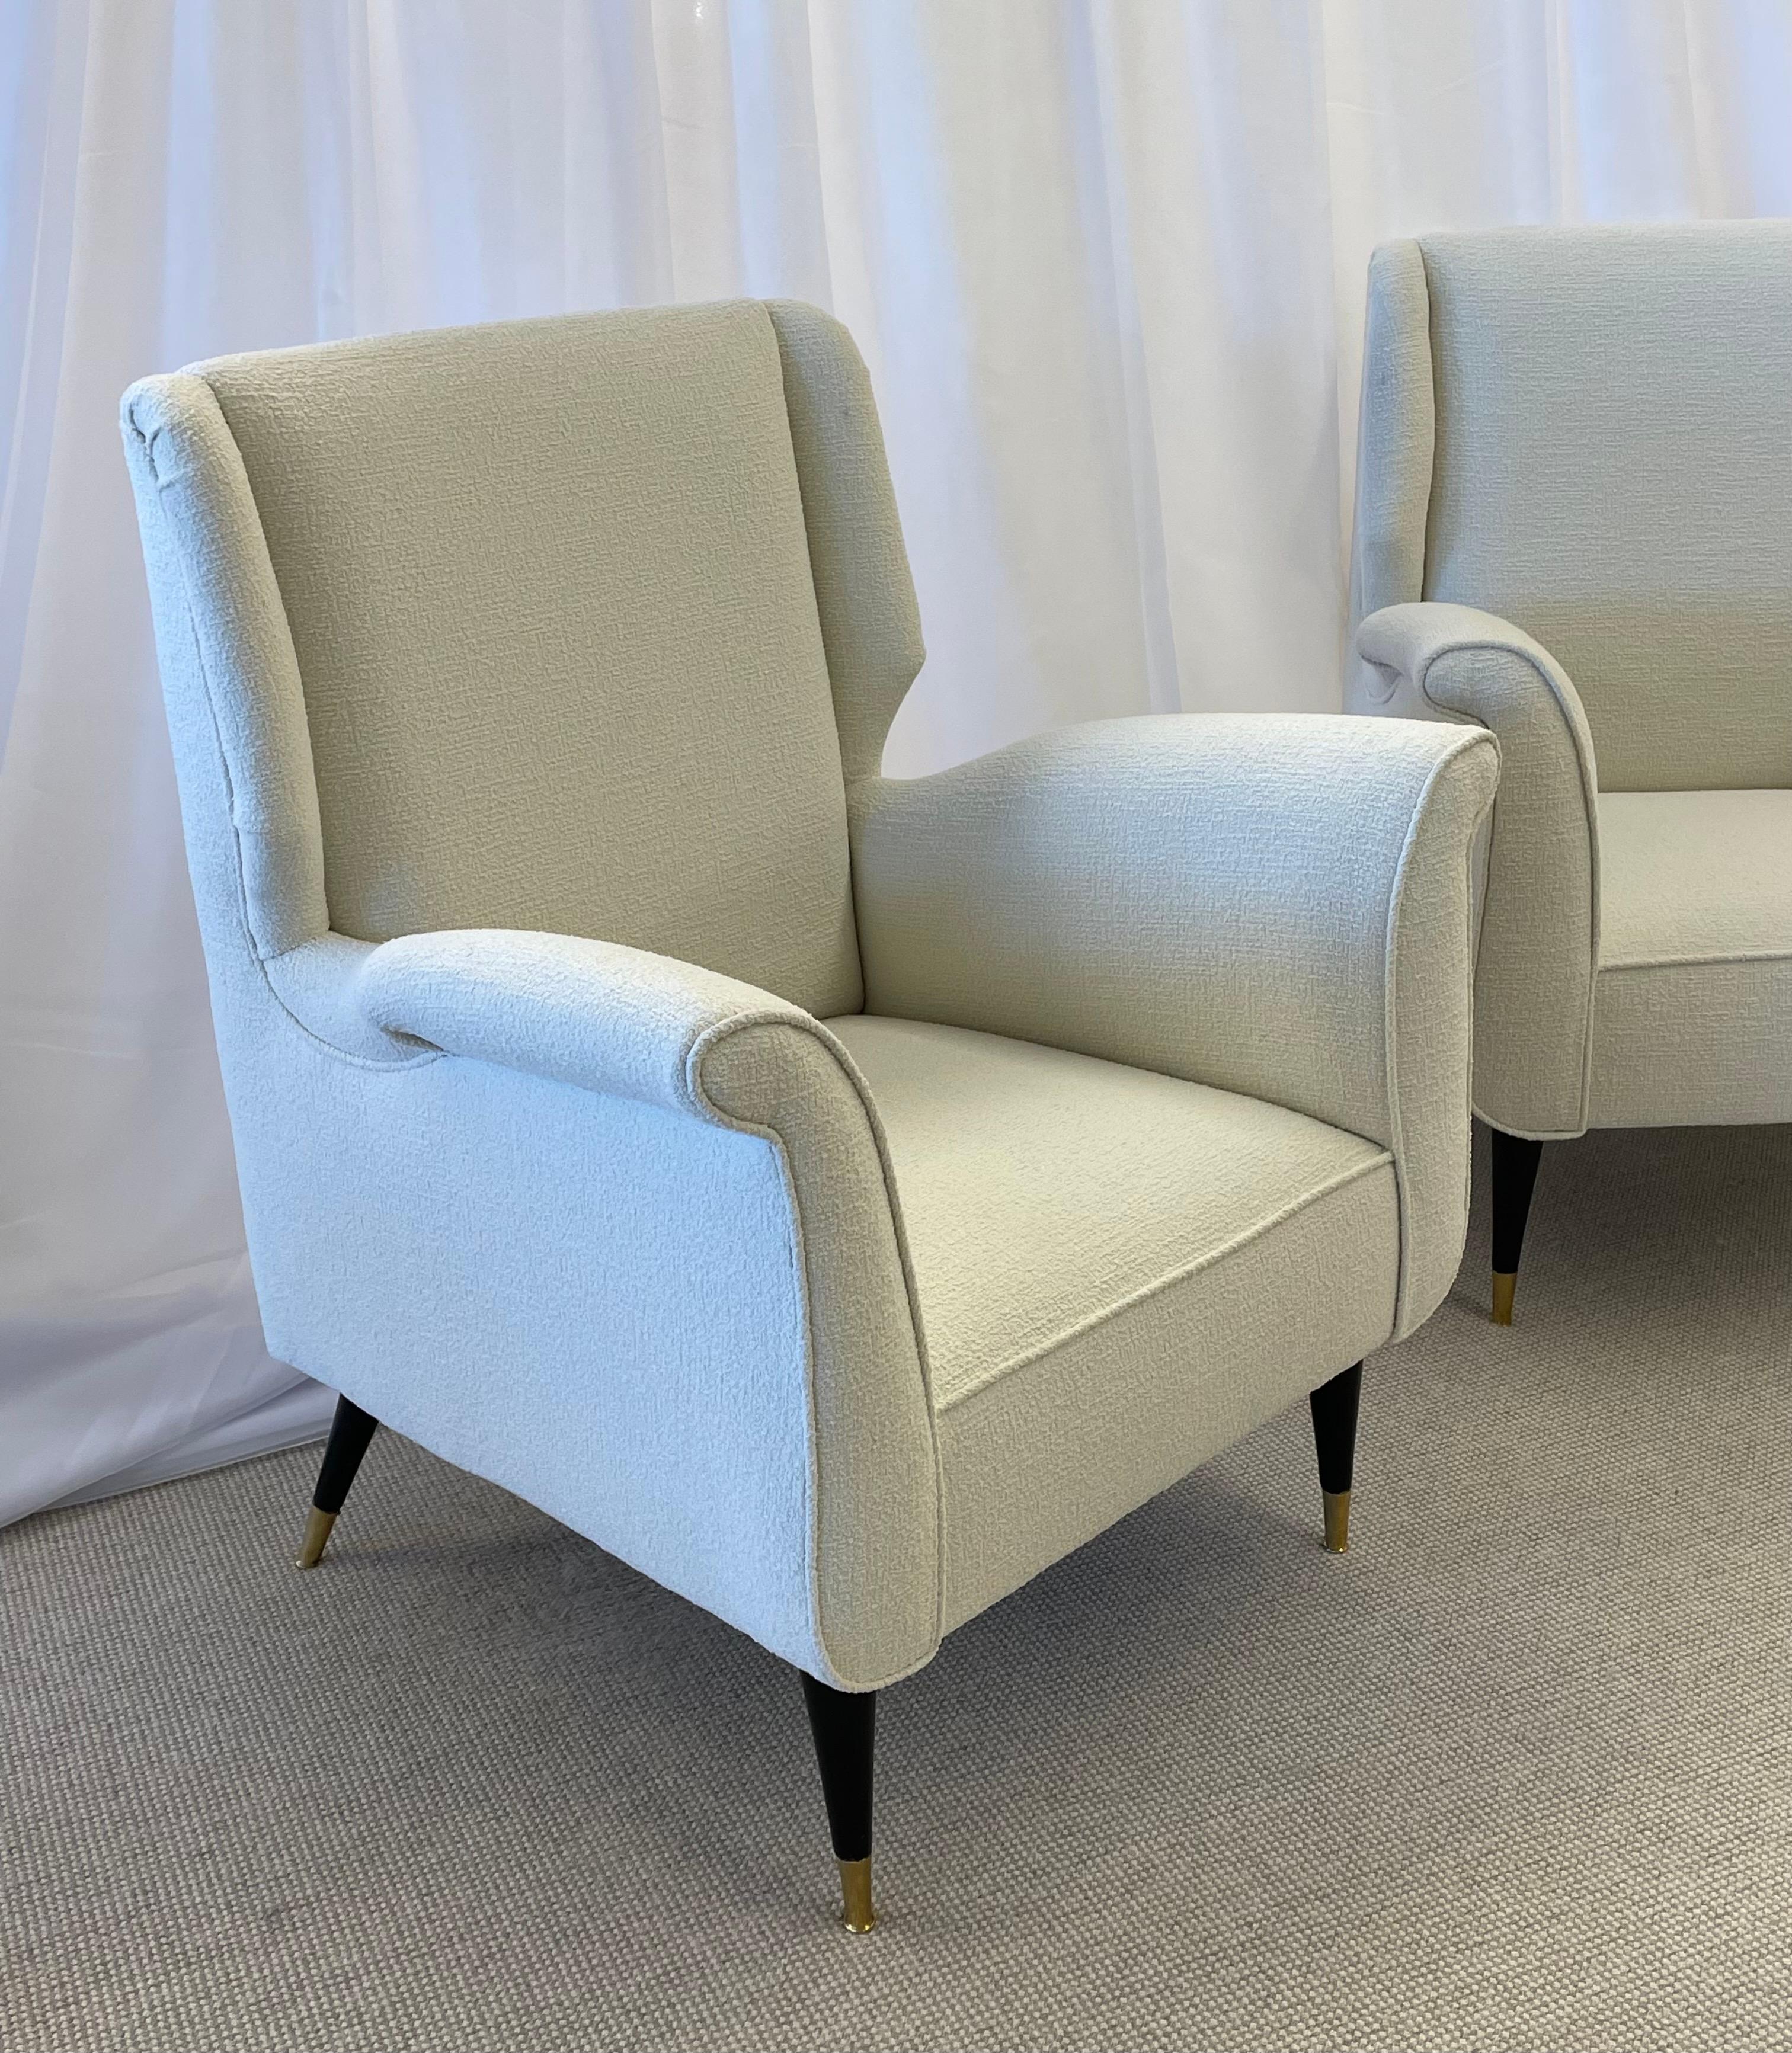 Mid-20th Century Mid-Century Modern Gio Ponti Style Armchairs, Wingback, a Pair in Kravet Bouclé For Sale